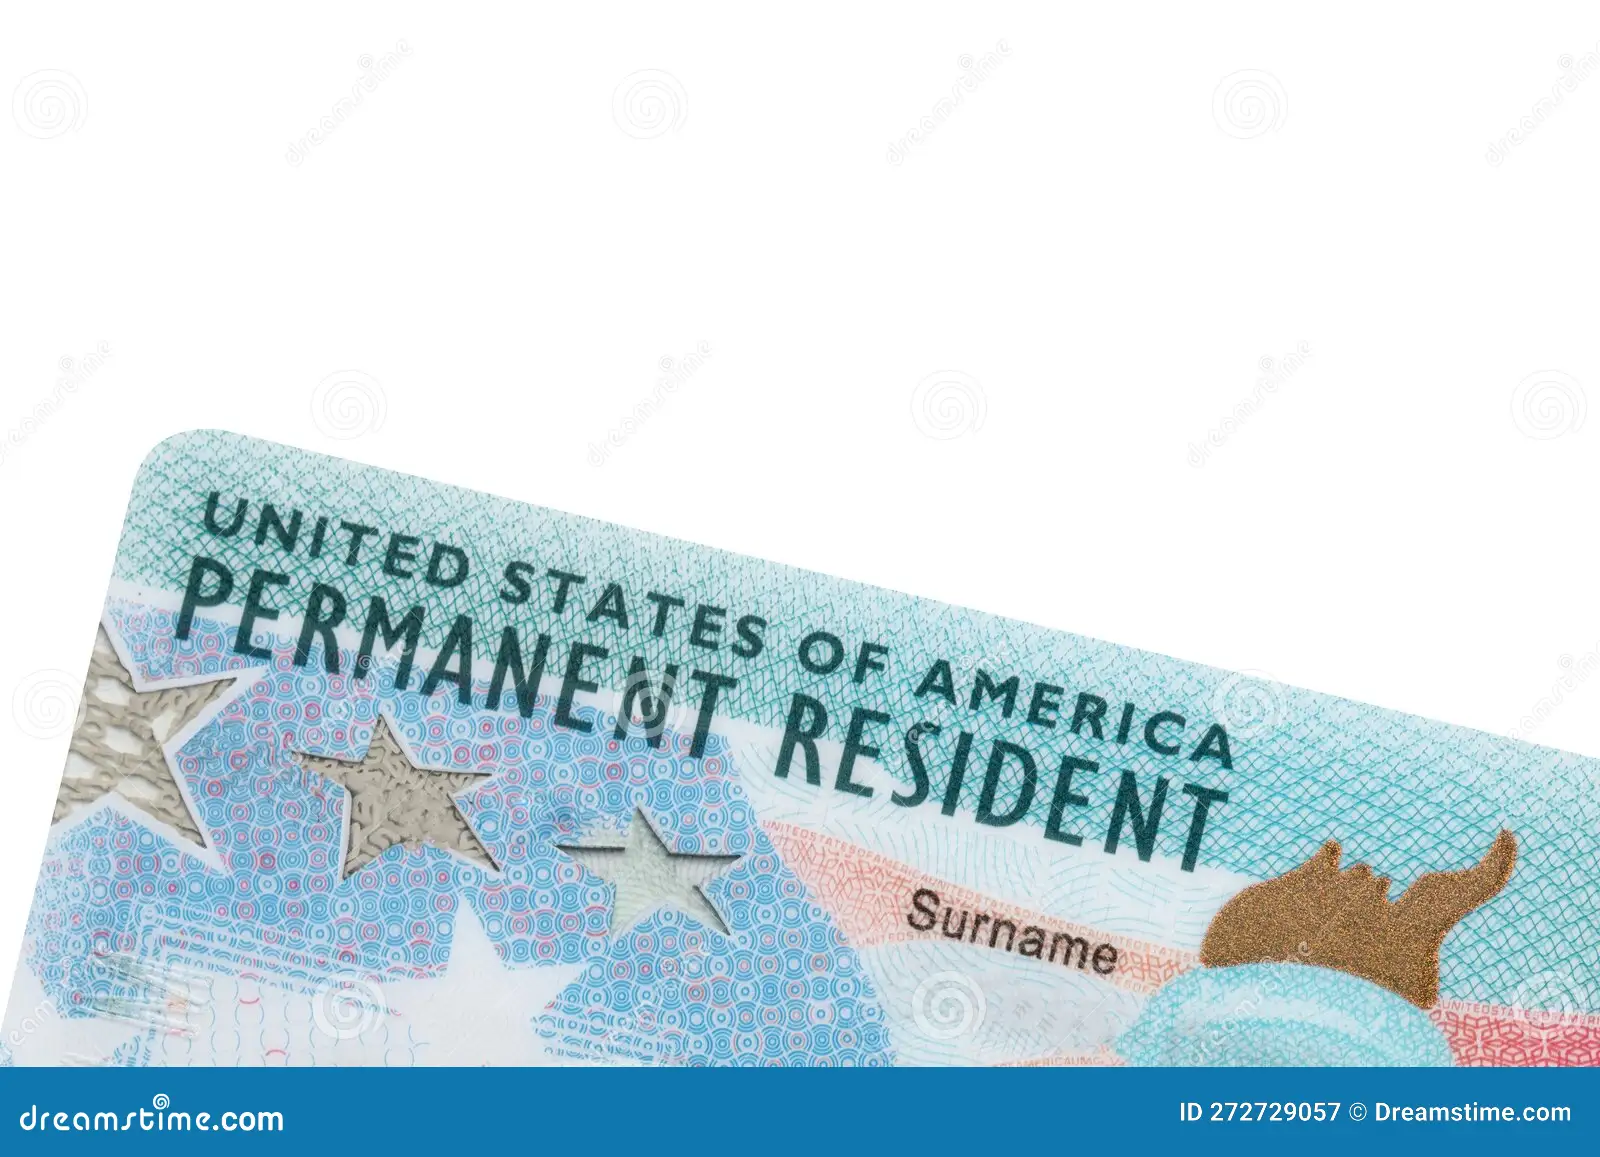 permanent residence green card